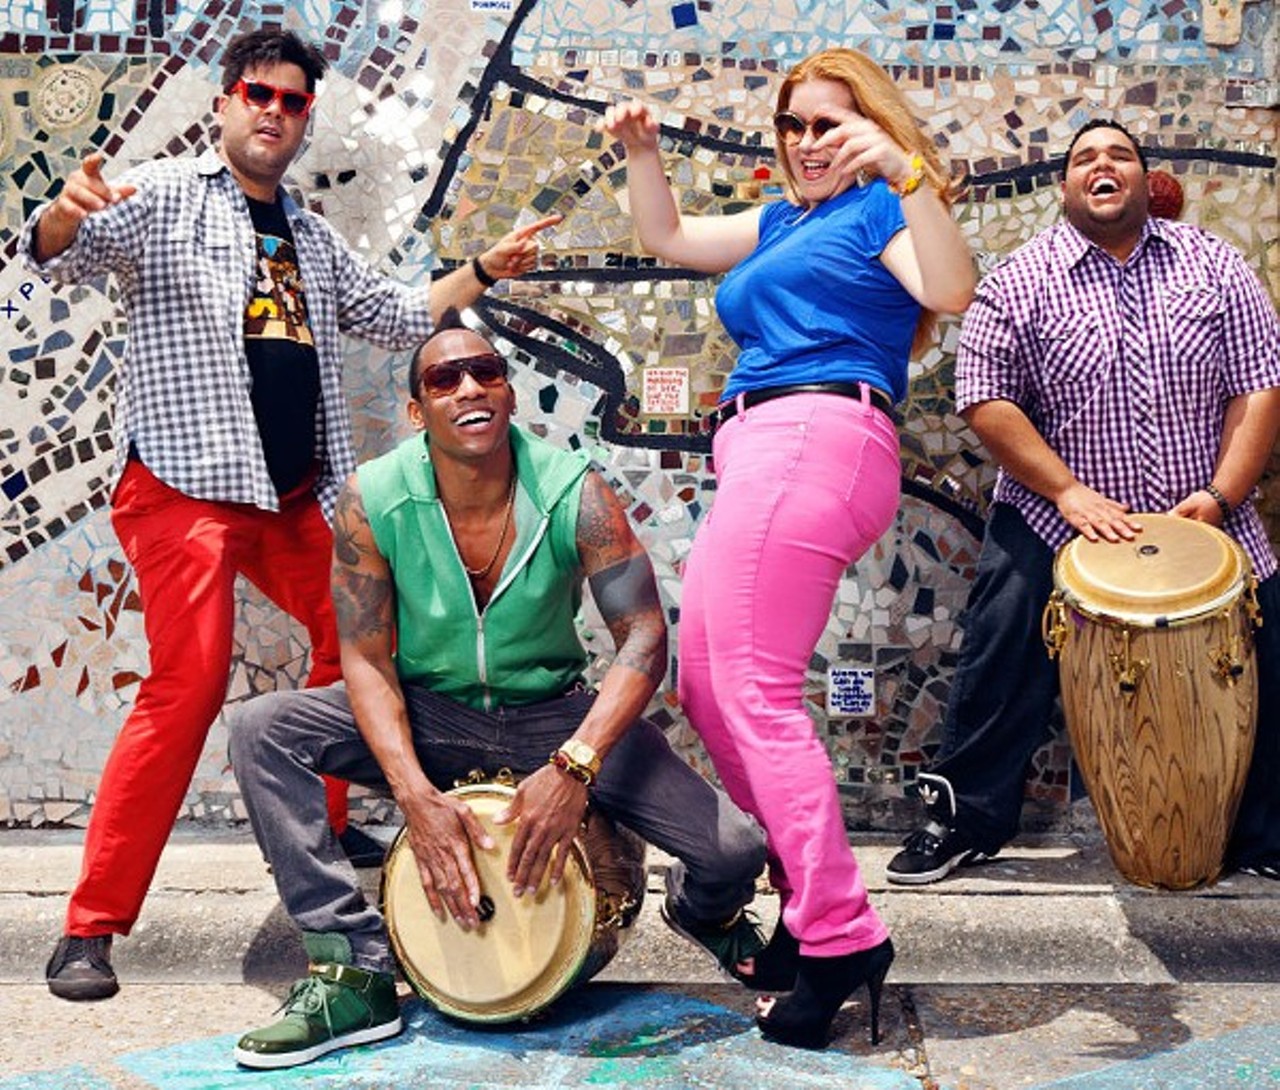 Pedrito Martinez Group
$19-$79, 7:30pm Sat, Guadalupe Theater, 1301 Guadalupe St., (210) 226-2891, artssa.org
Afro-Cuban often serves as a catchall, a placeholder to describe any advertently Latin or particularly rhythmic sound. Pedrito Martinez, as it turns out, is exactly who the term exists for. Born into Havana&#146;s Cayo Hueso neighborhood, he adopted the West African bata drum in service of the conga and rumba rhythms churning throughout the city&#146;s streets